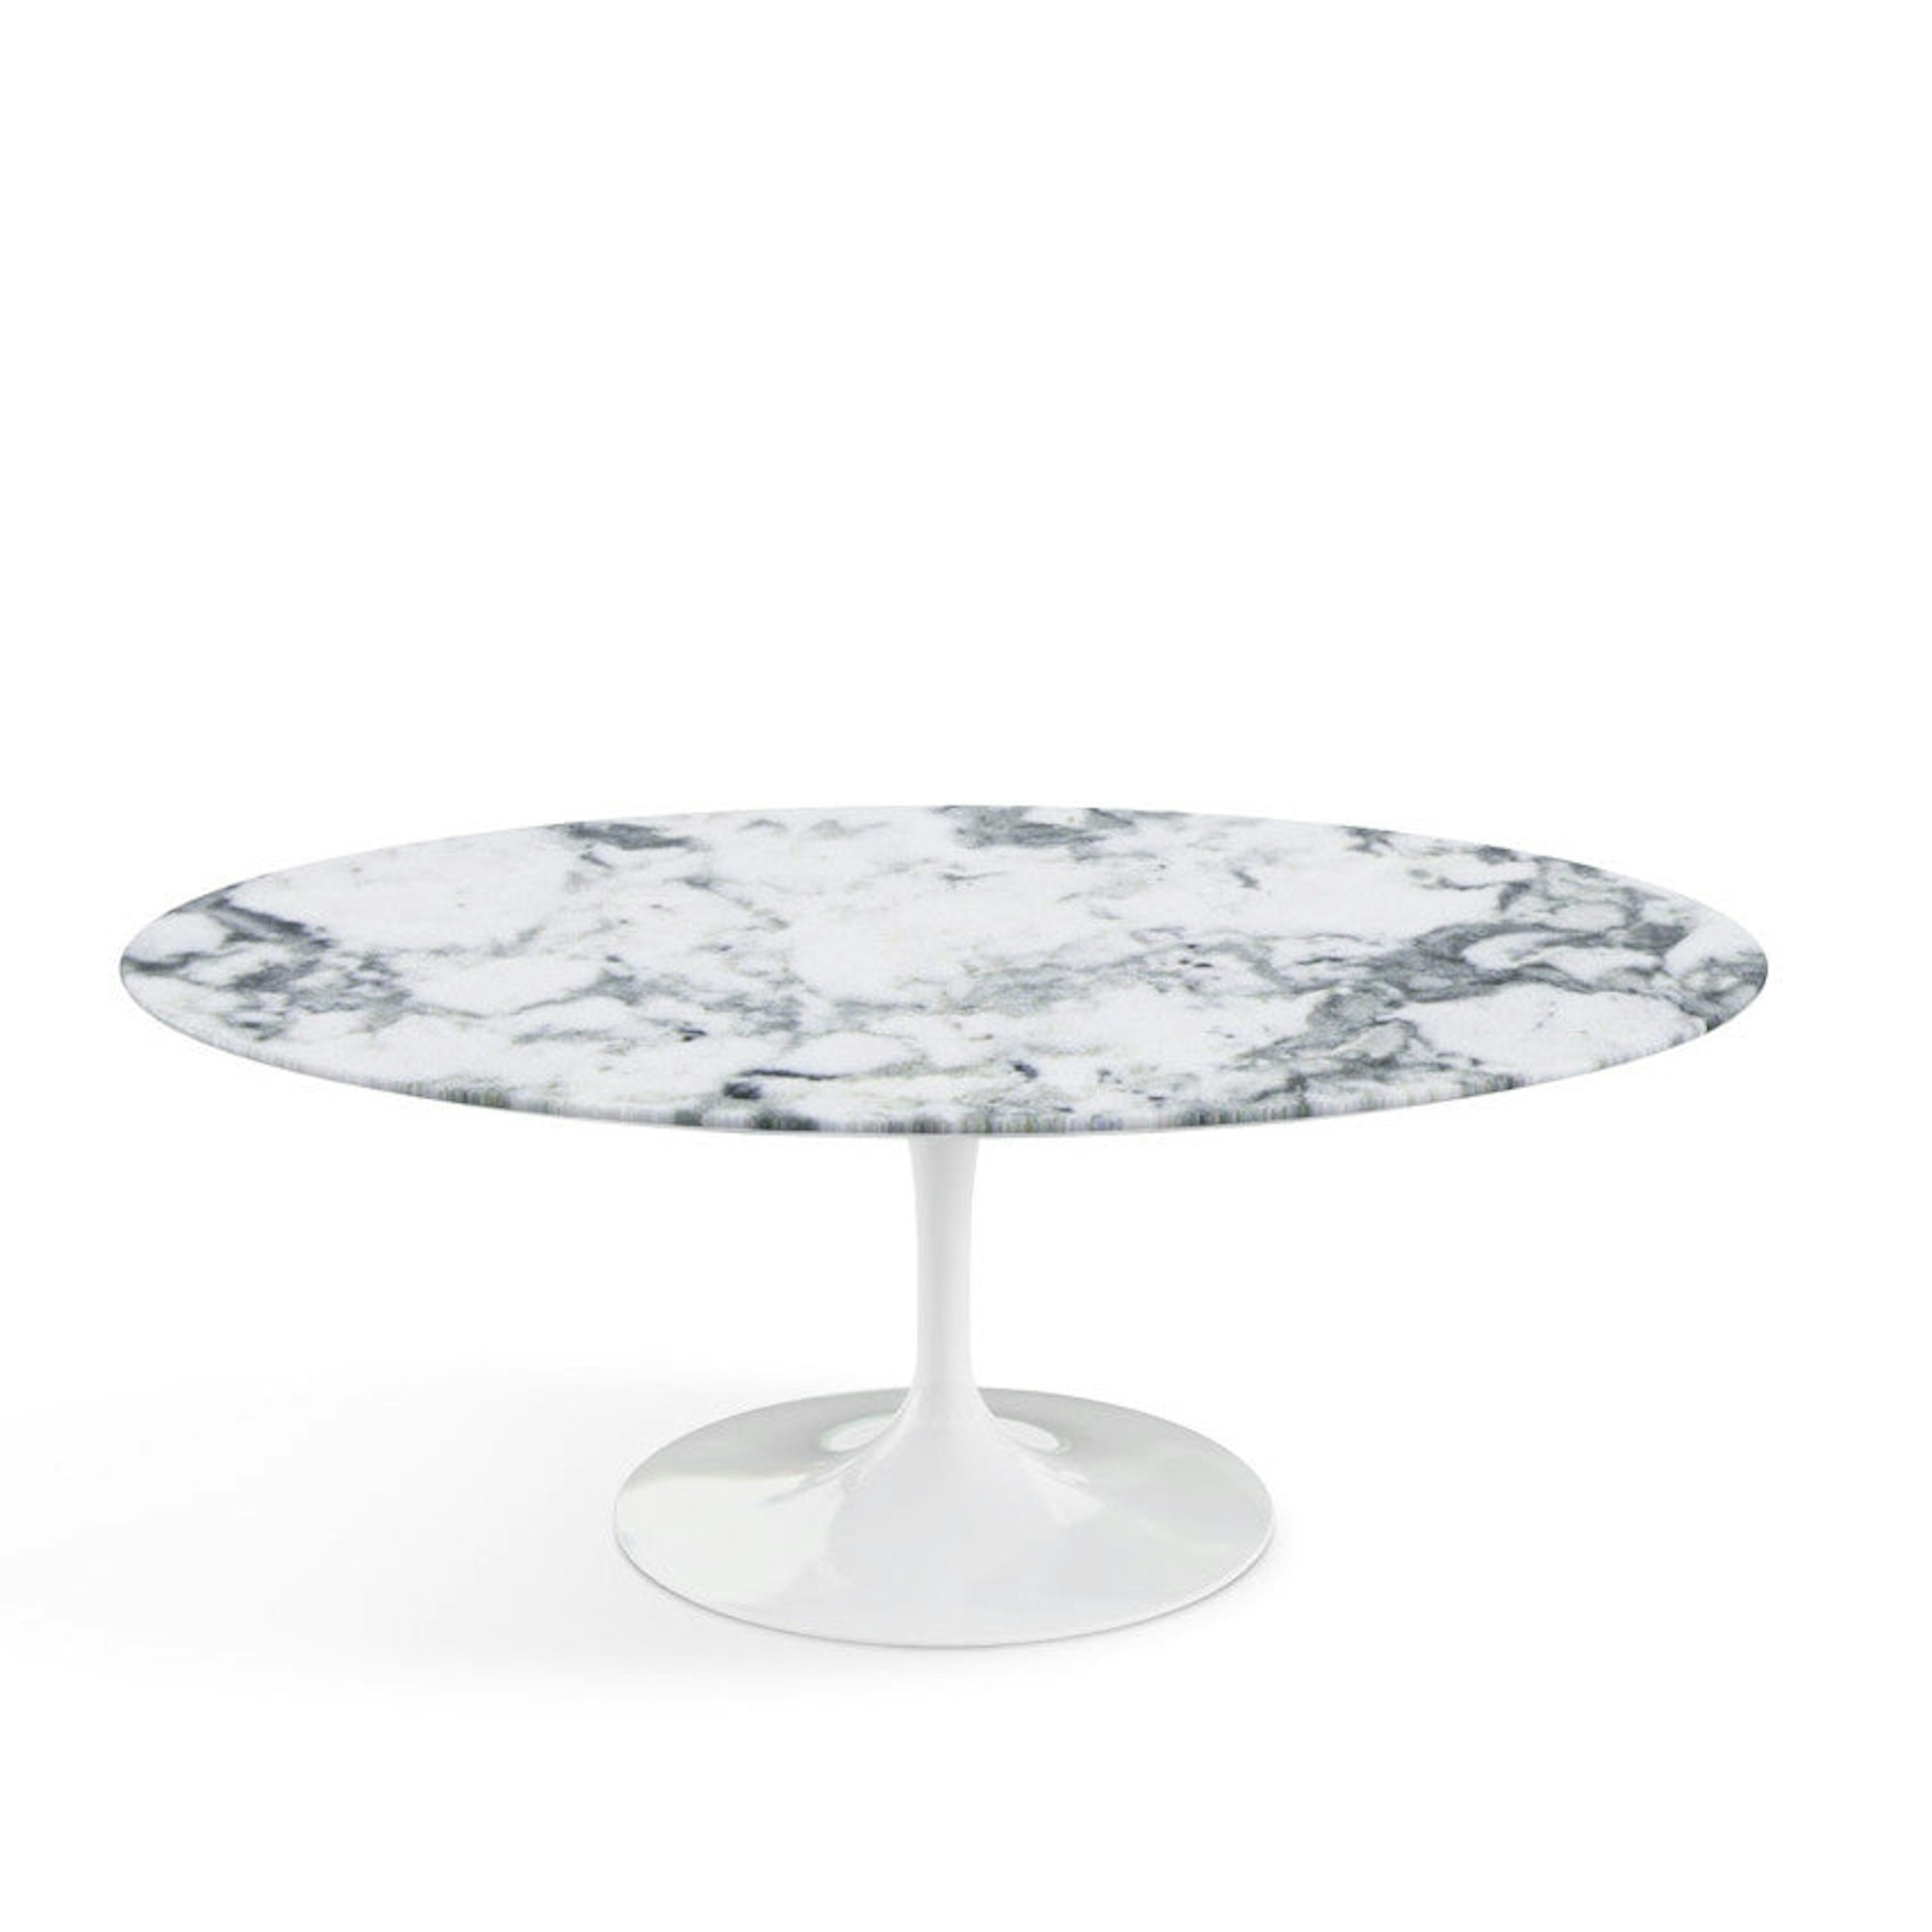 Tulip Coffee Table Round by Knoll